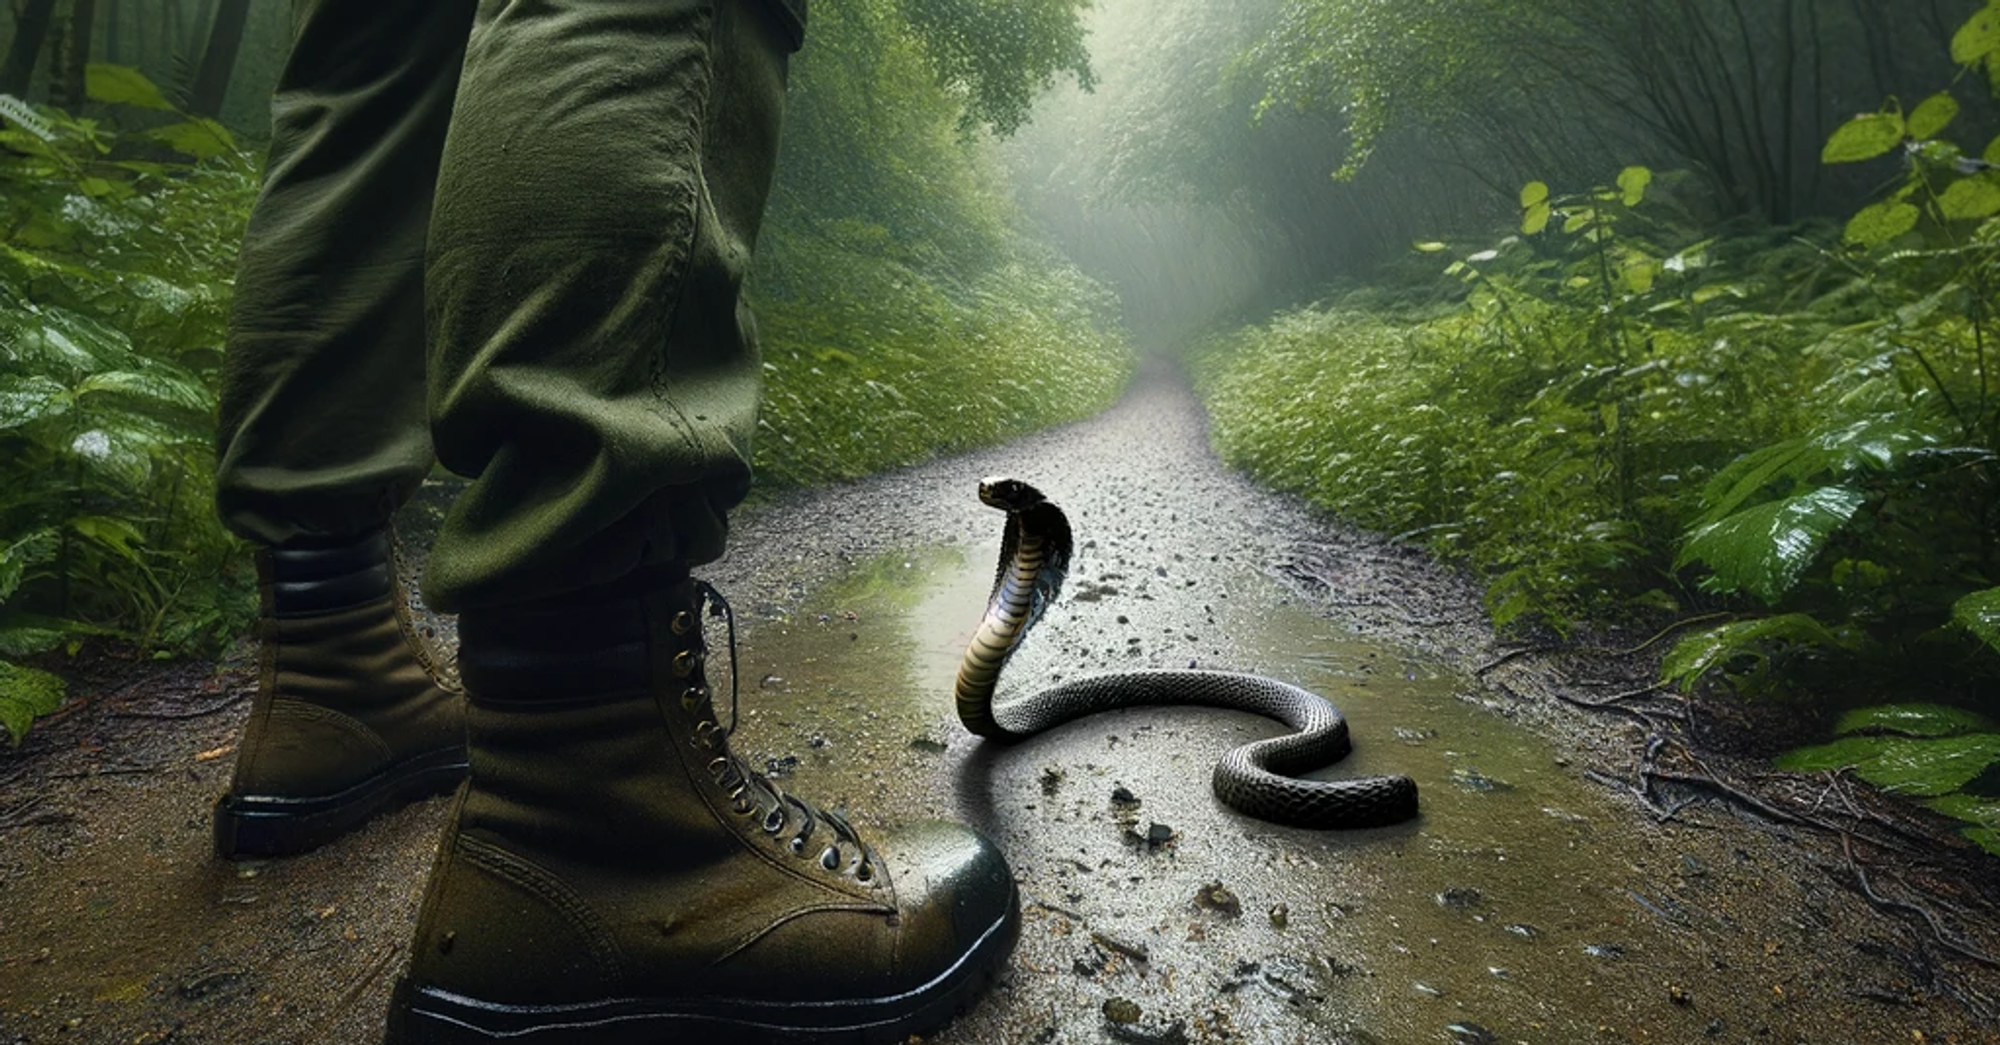 A snake on a path in front of a person